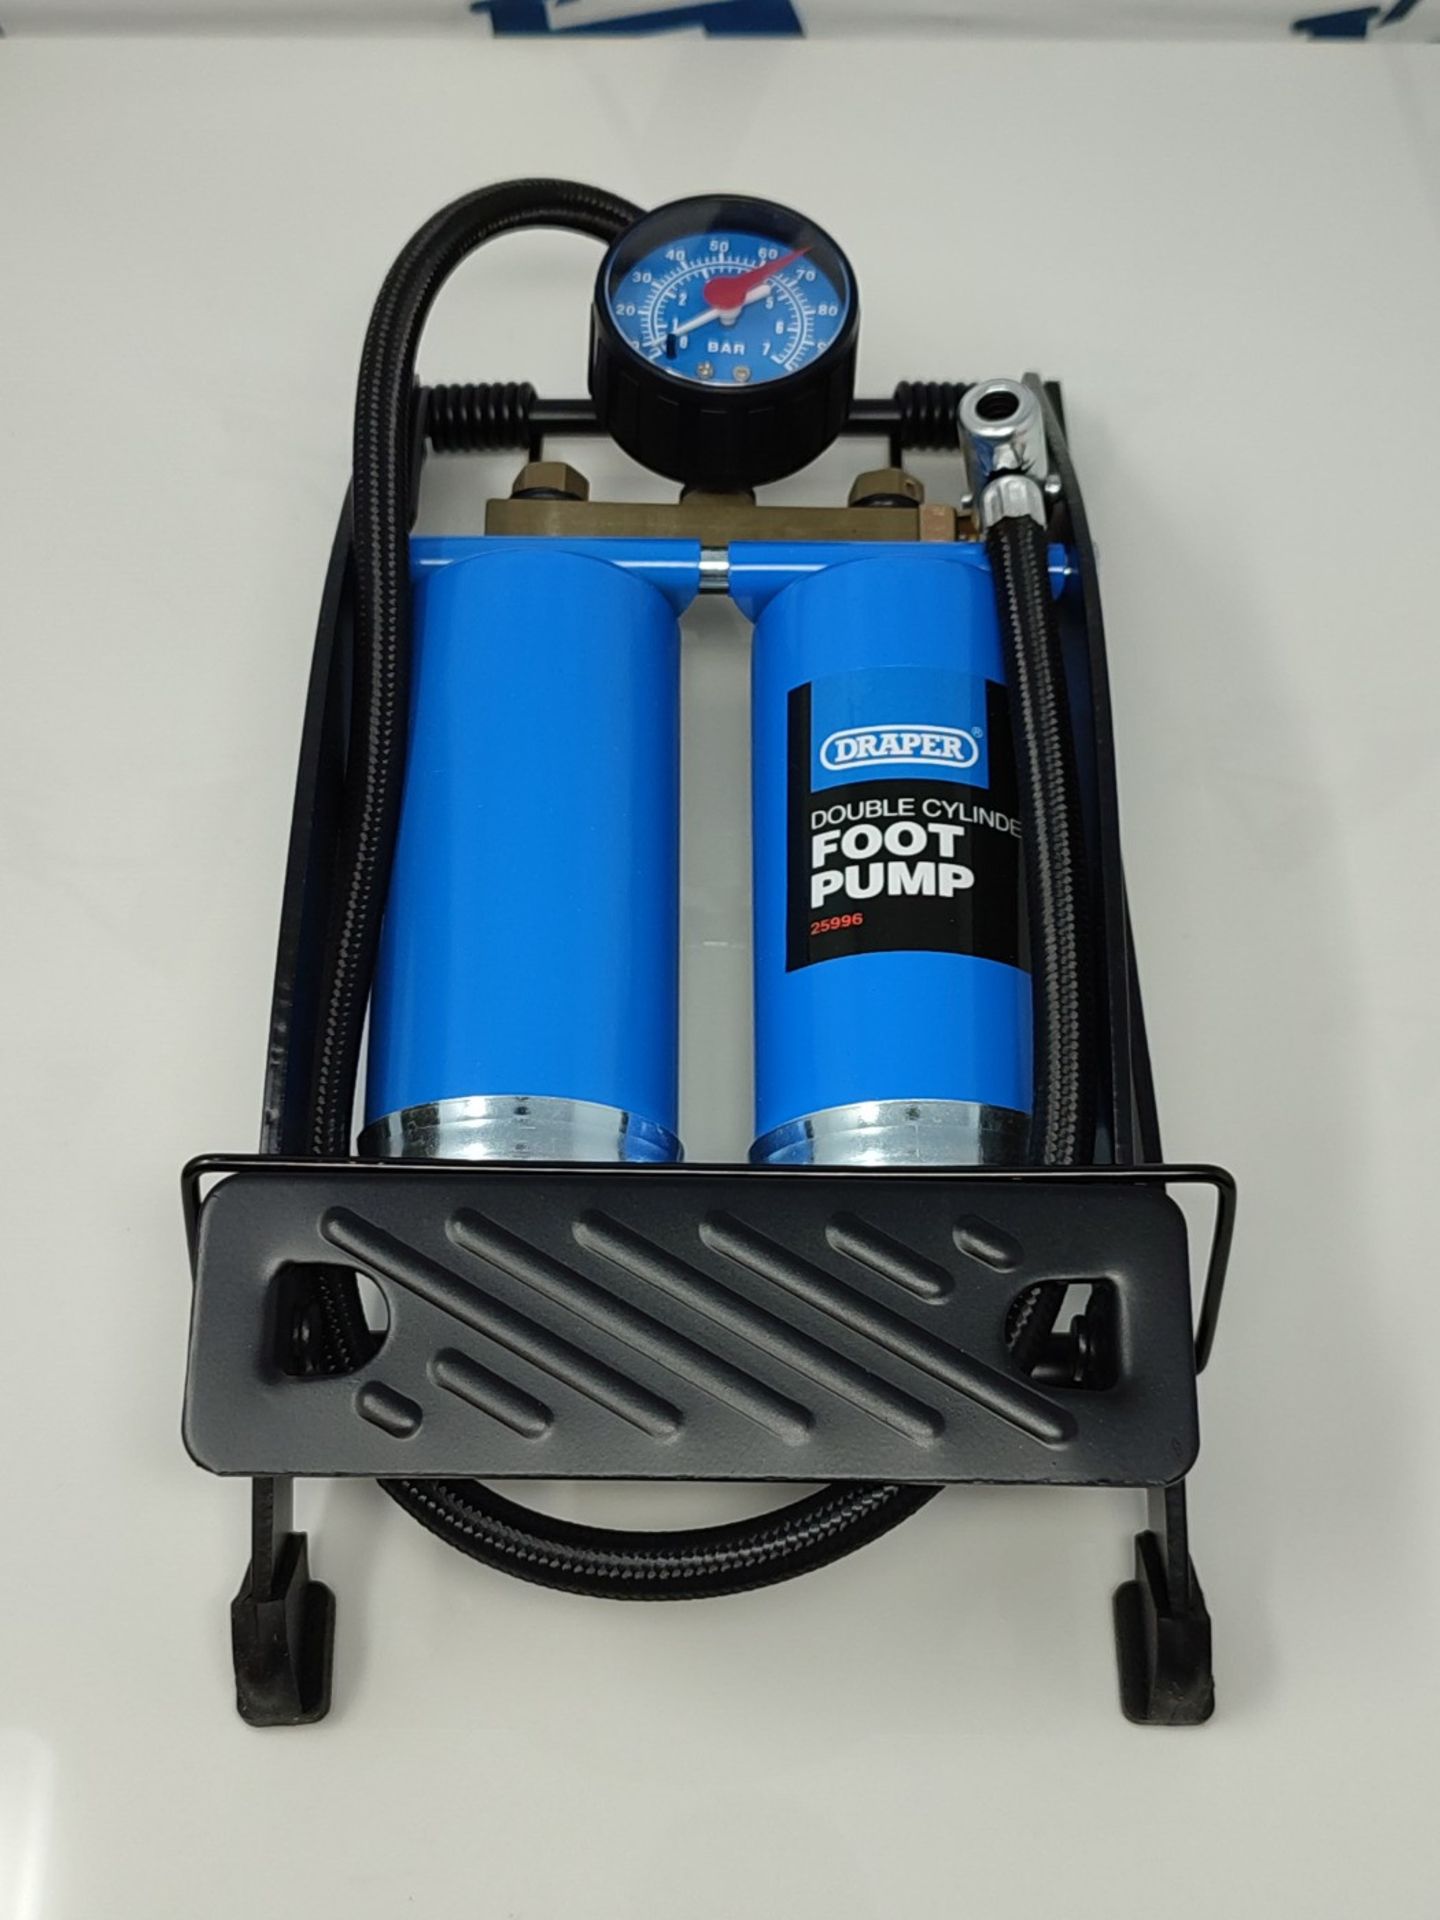 Draper Double-Cylinder Foot Pump with Pressure Gauge & Accessories - 25996 - Manual In - Image 3 of 3